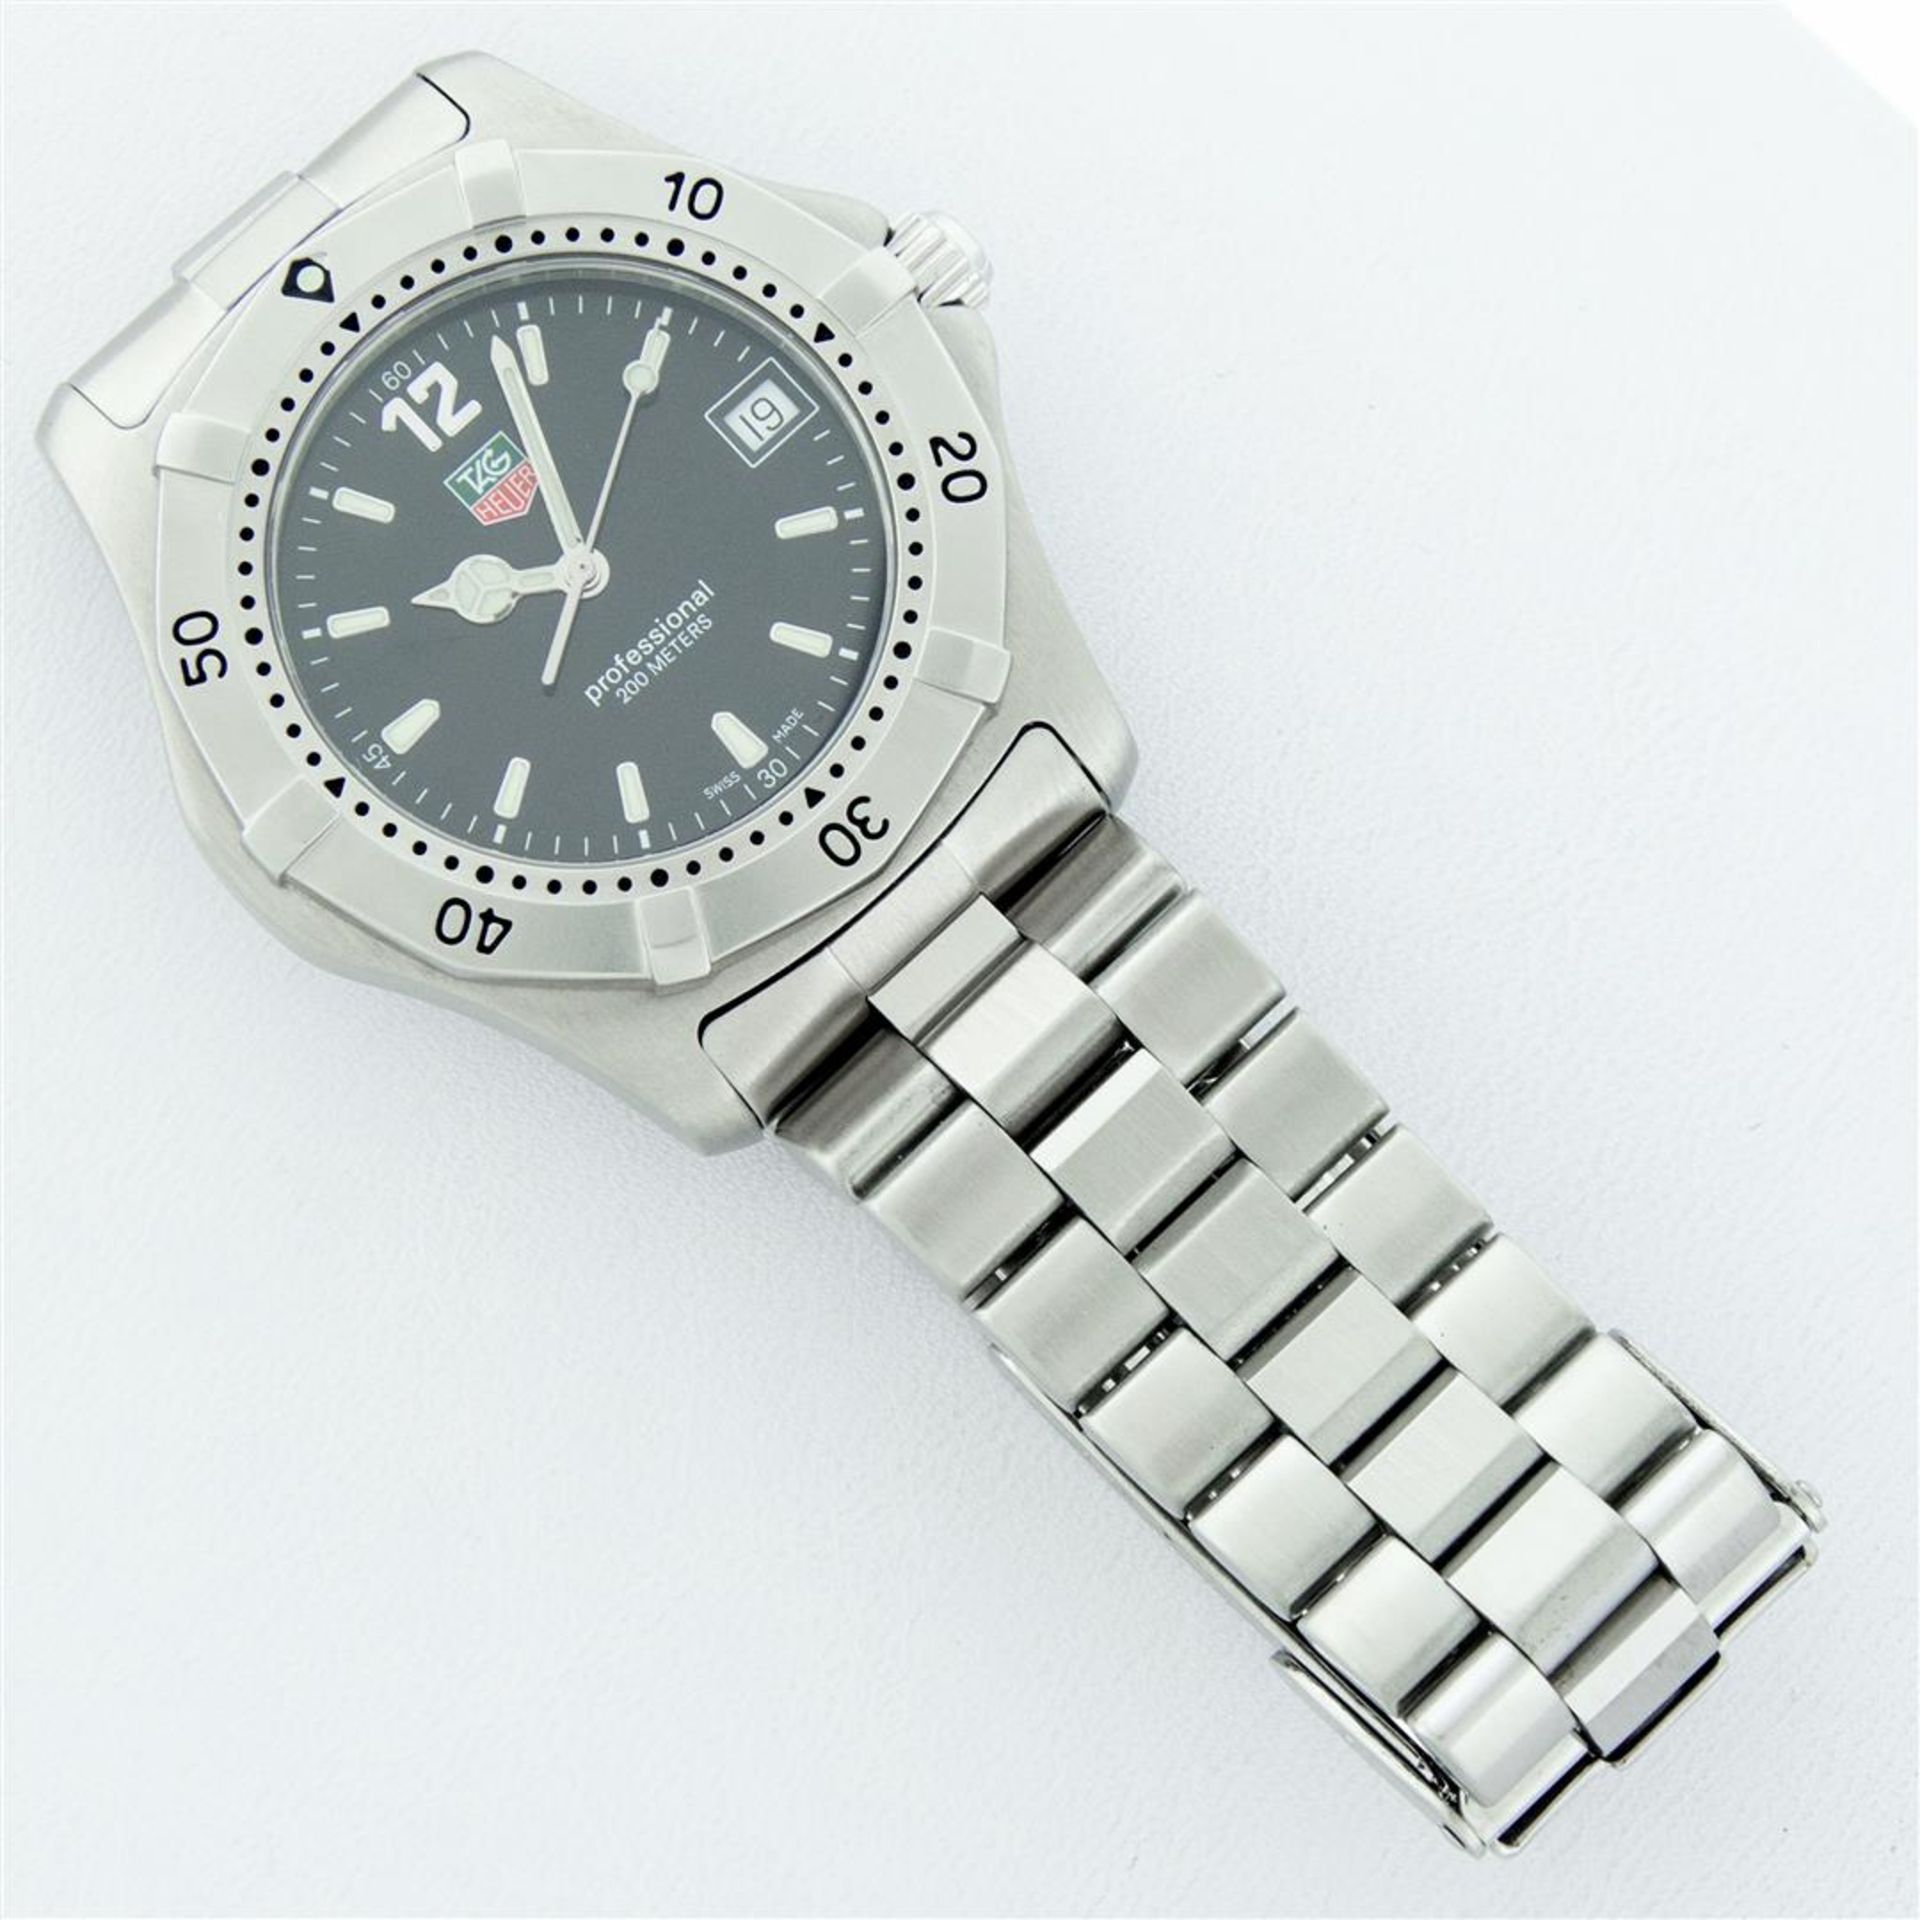 Tag Heuer Unisex Stainless Steel Black Dial 37mm Professional Series Wristwatch - Image 7 of 9